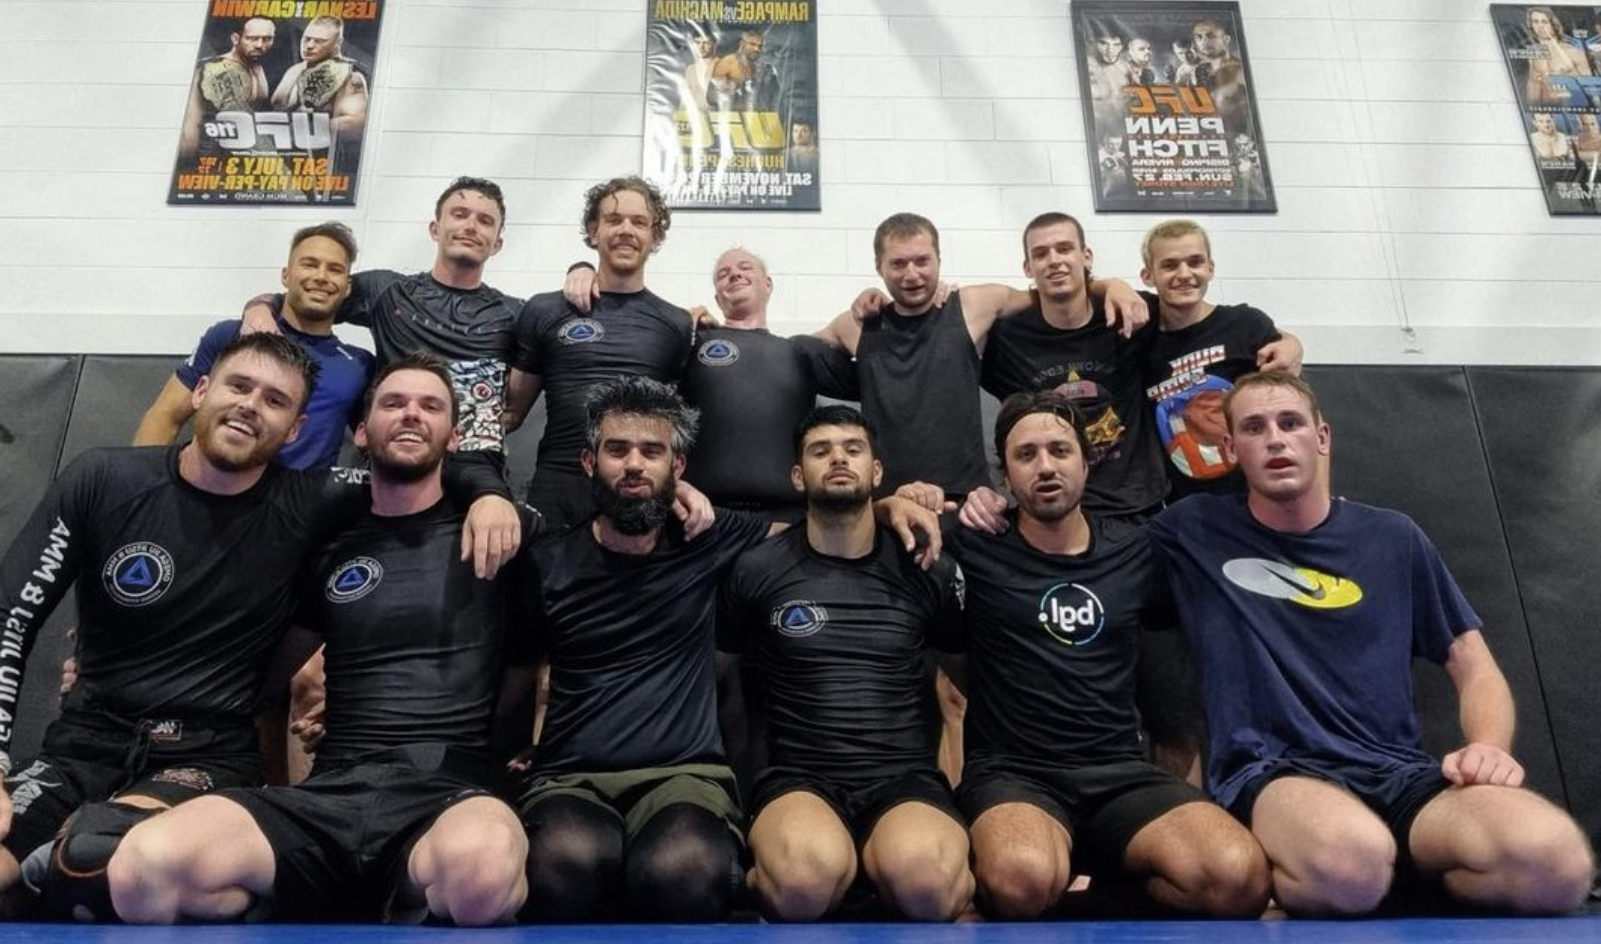 Lewis mma cropped